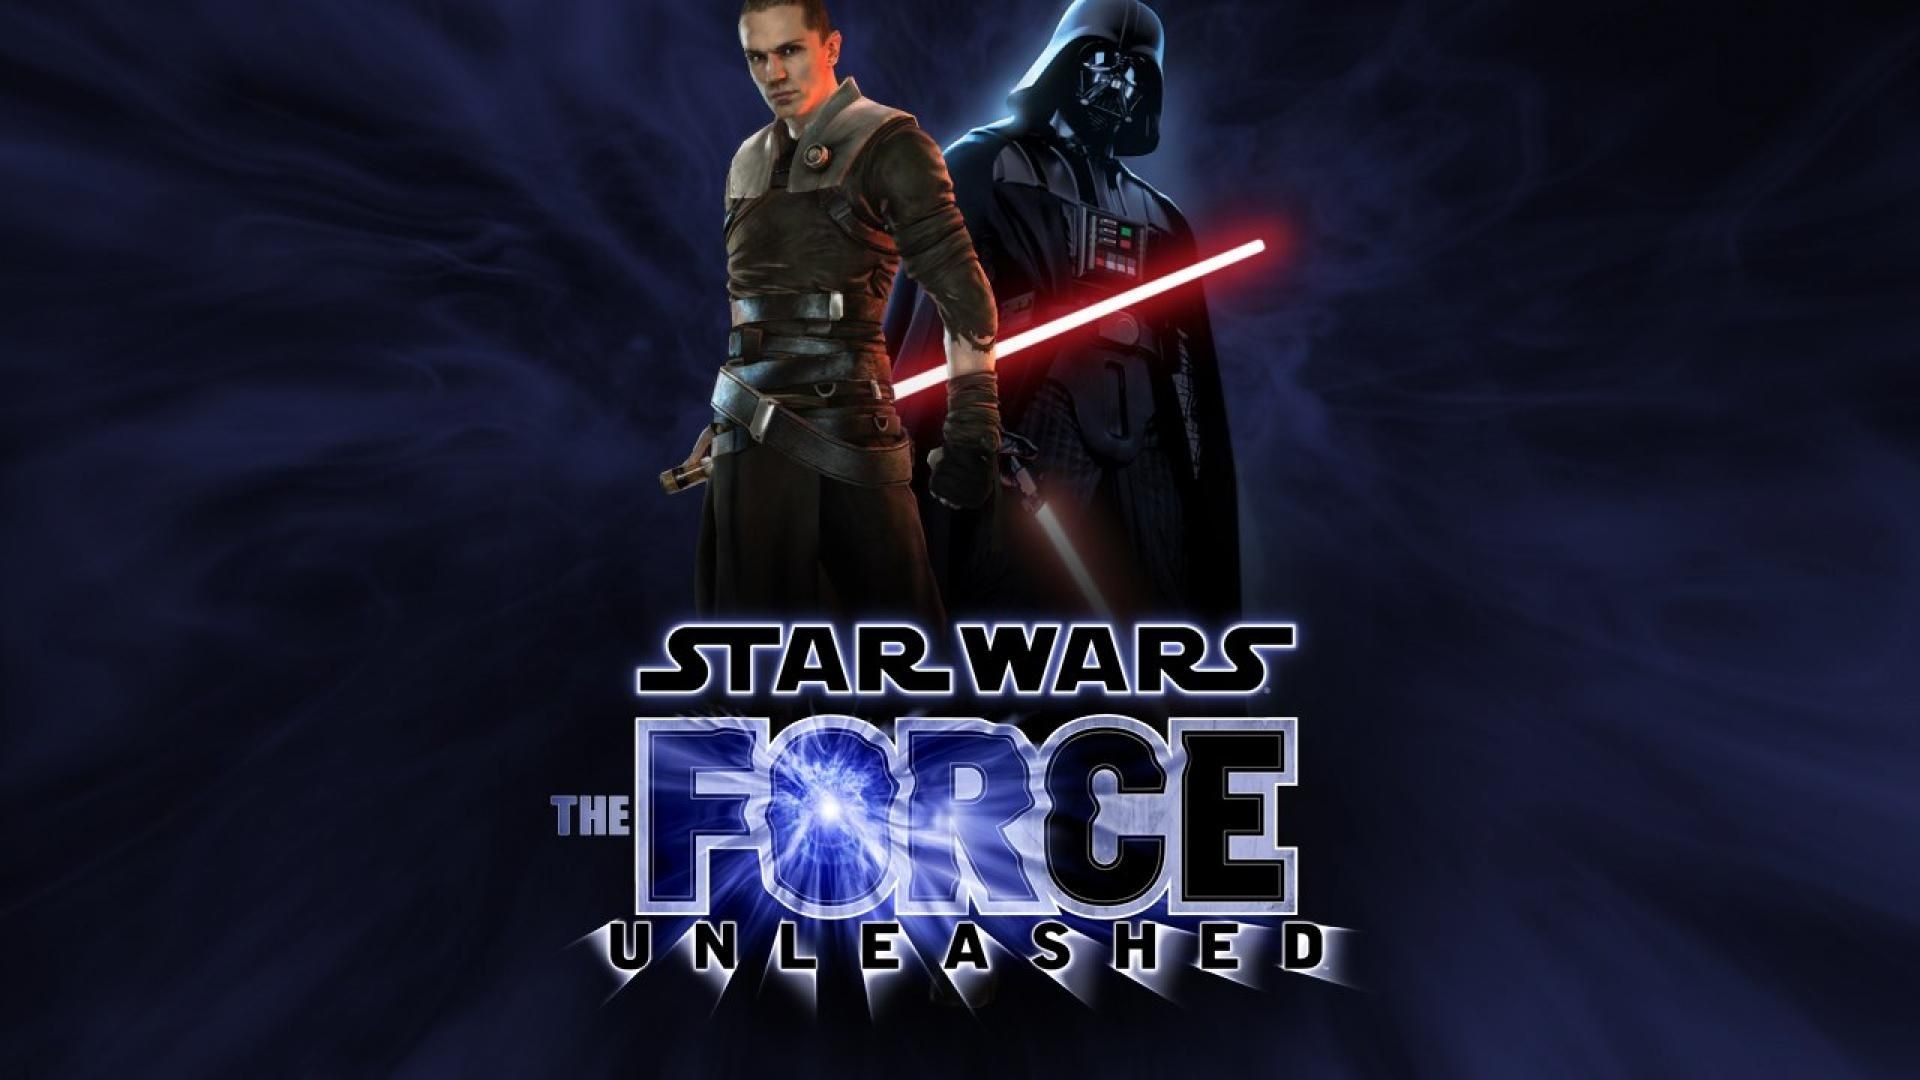 Darth vader star wars the force unleashed games hd wallpaper .